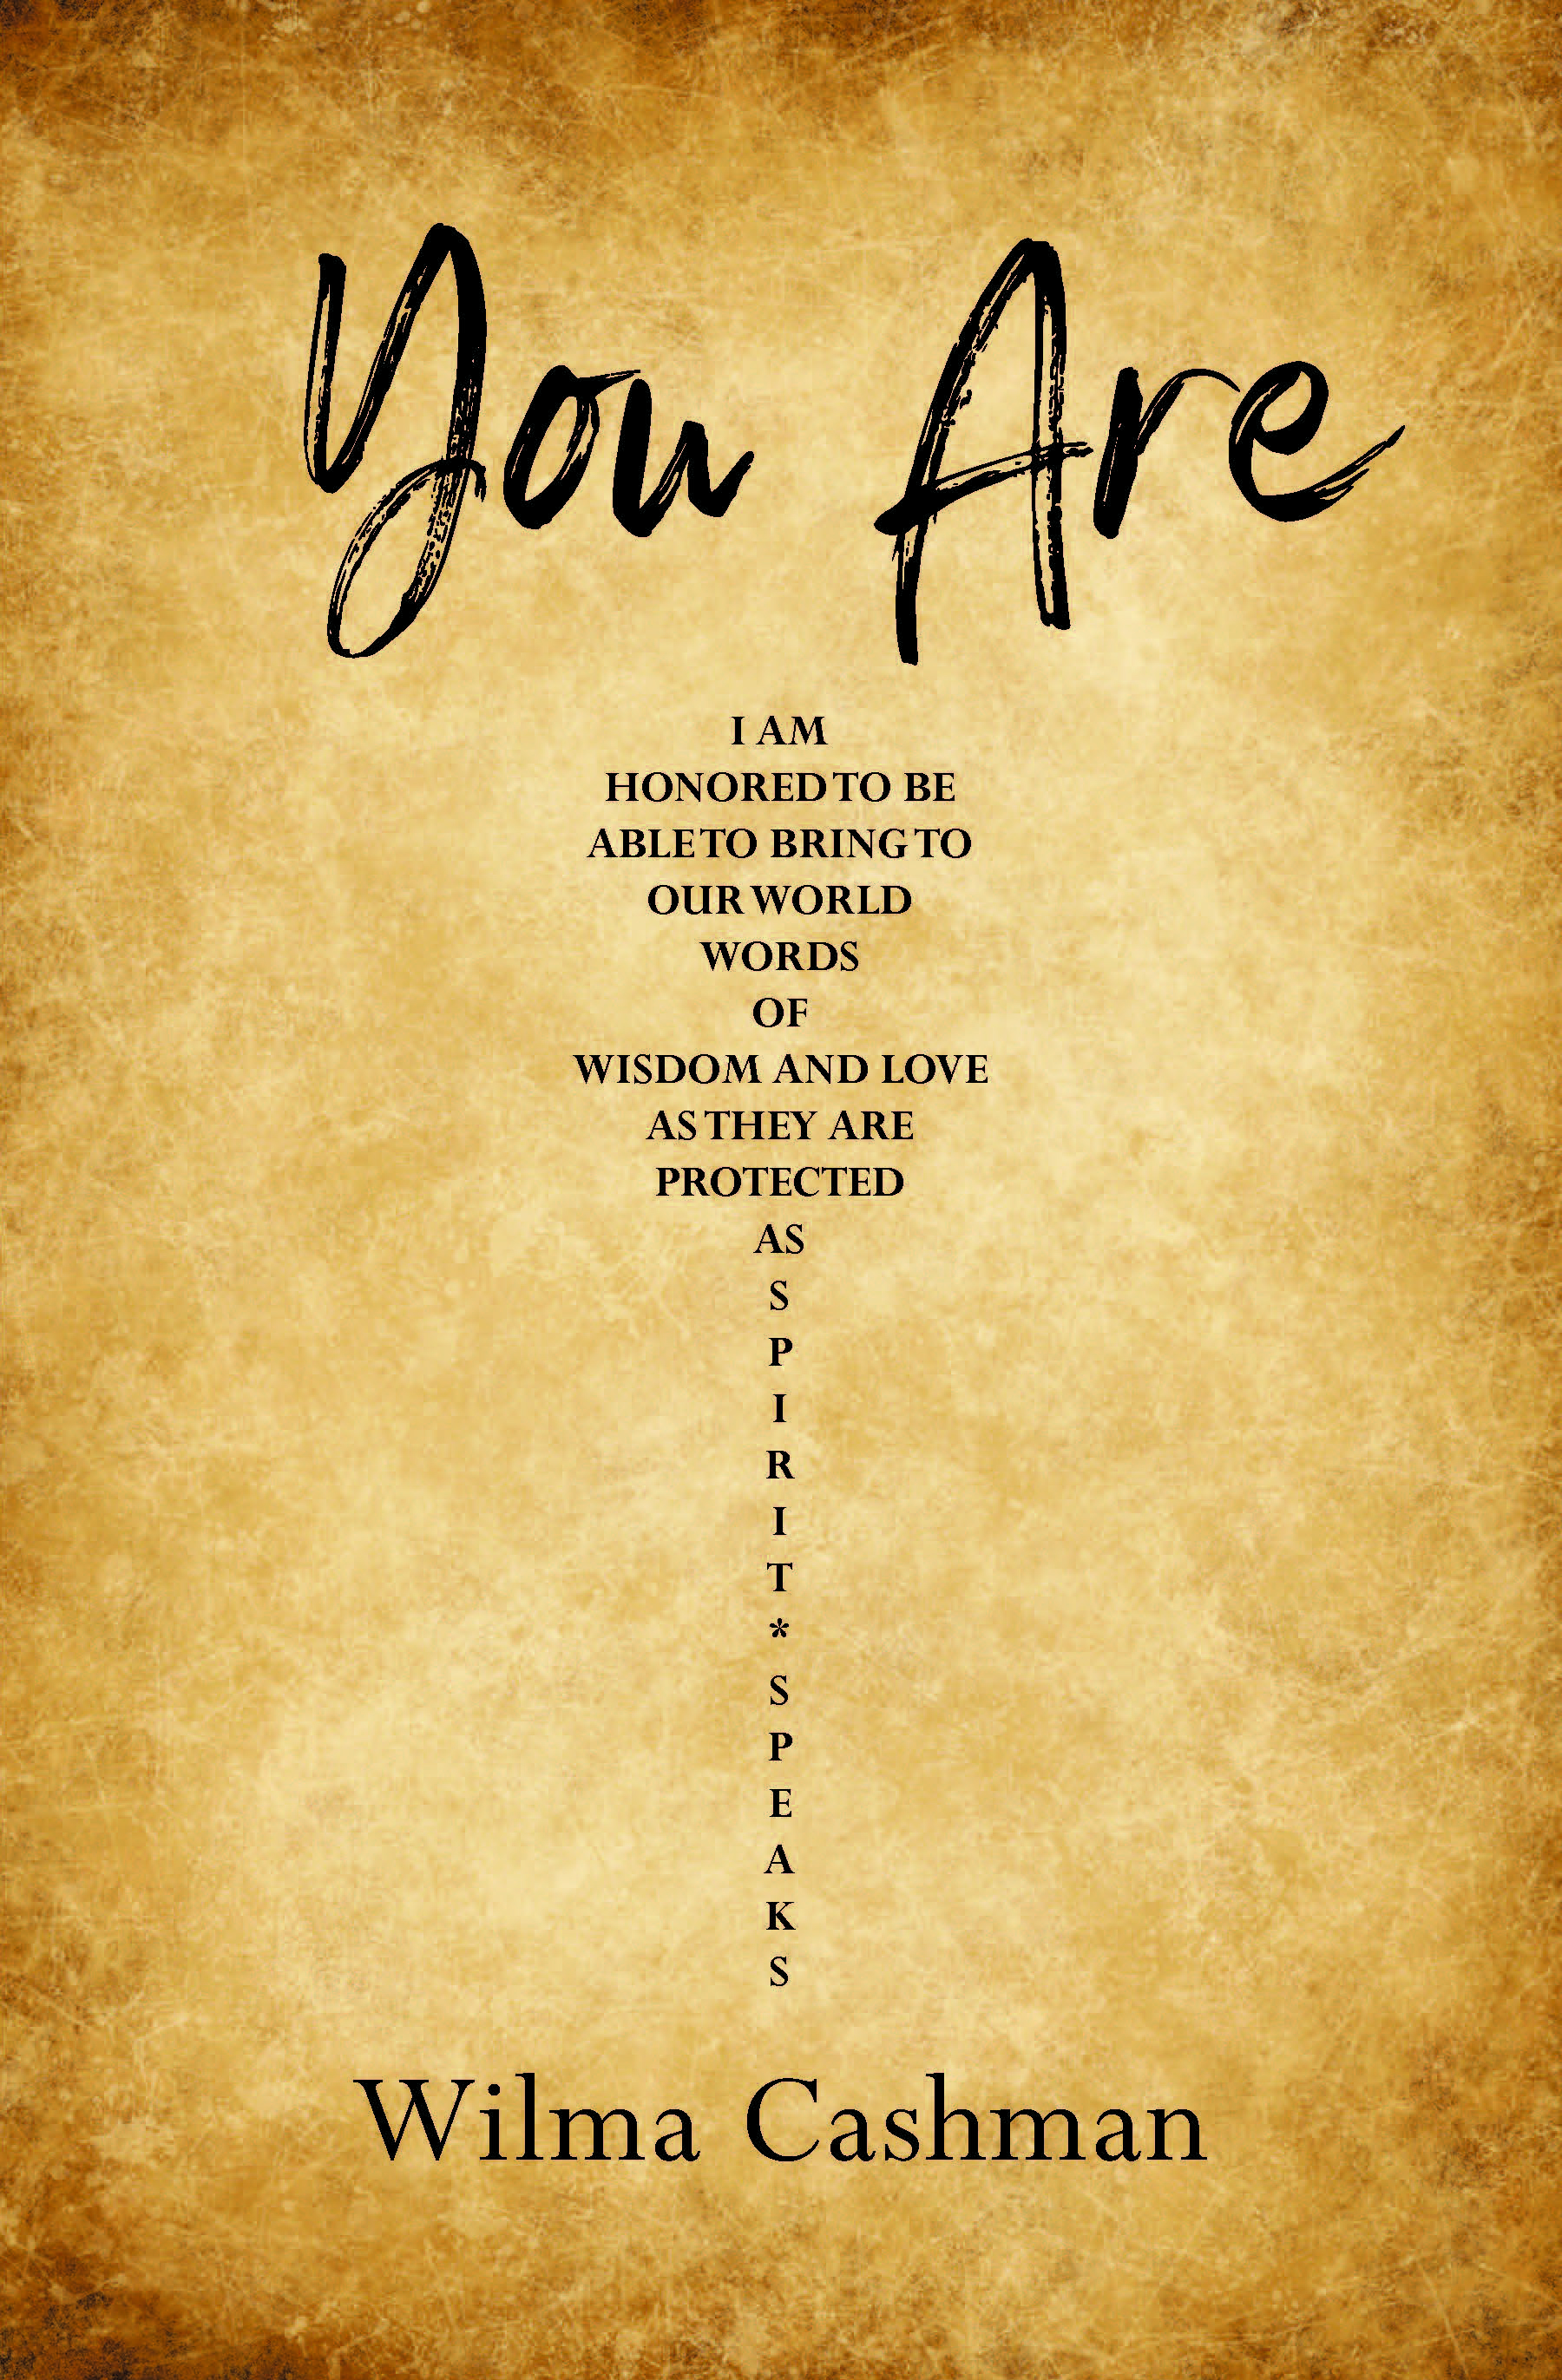 Author Wilma Cashman’s New Book, "You Are," is a Prayerful and Uplifting Devotional for Christian Readers Seeking a Closer Connection with God